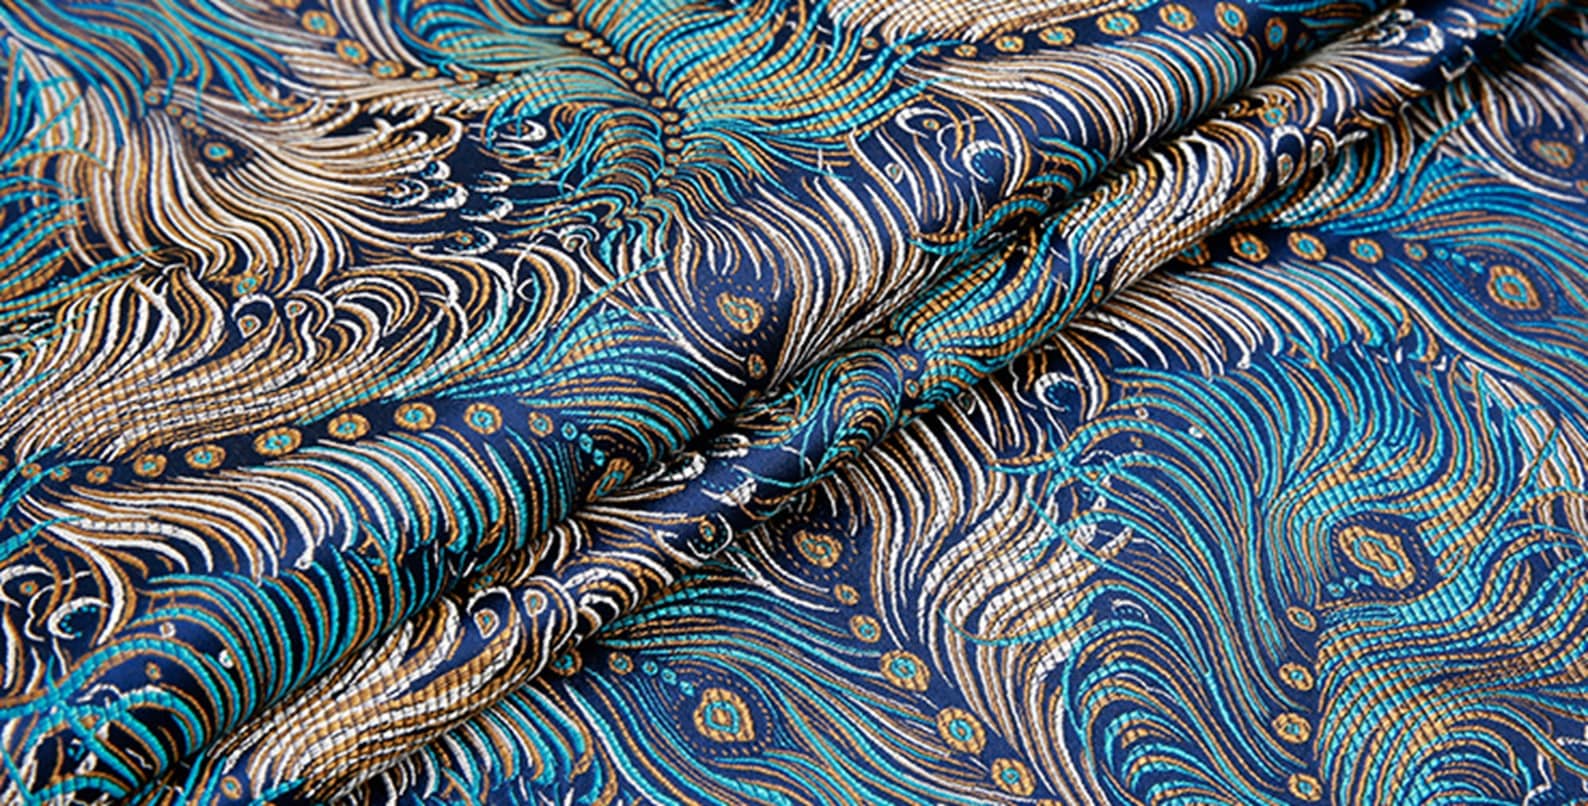 The Peacock Brocade Fabric by A Yard Chinese Brocade Fabric - Etsy